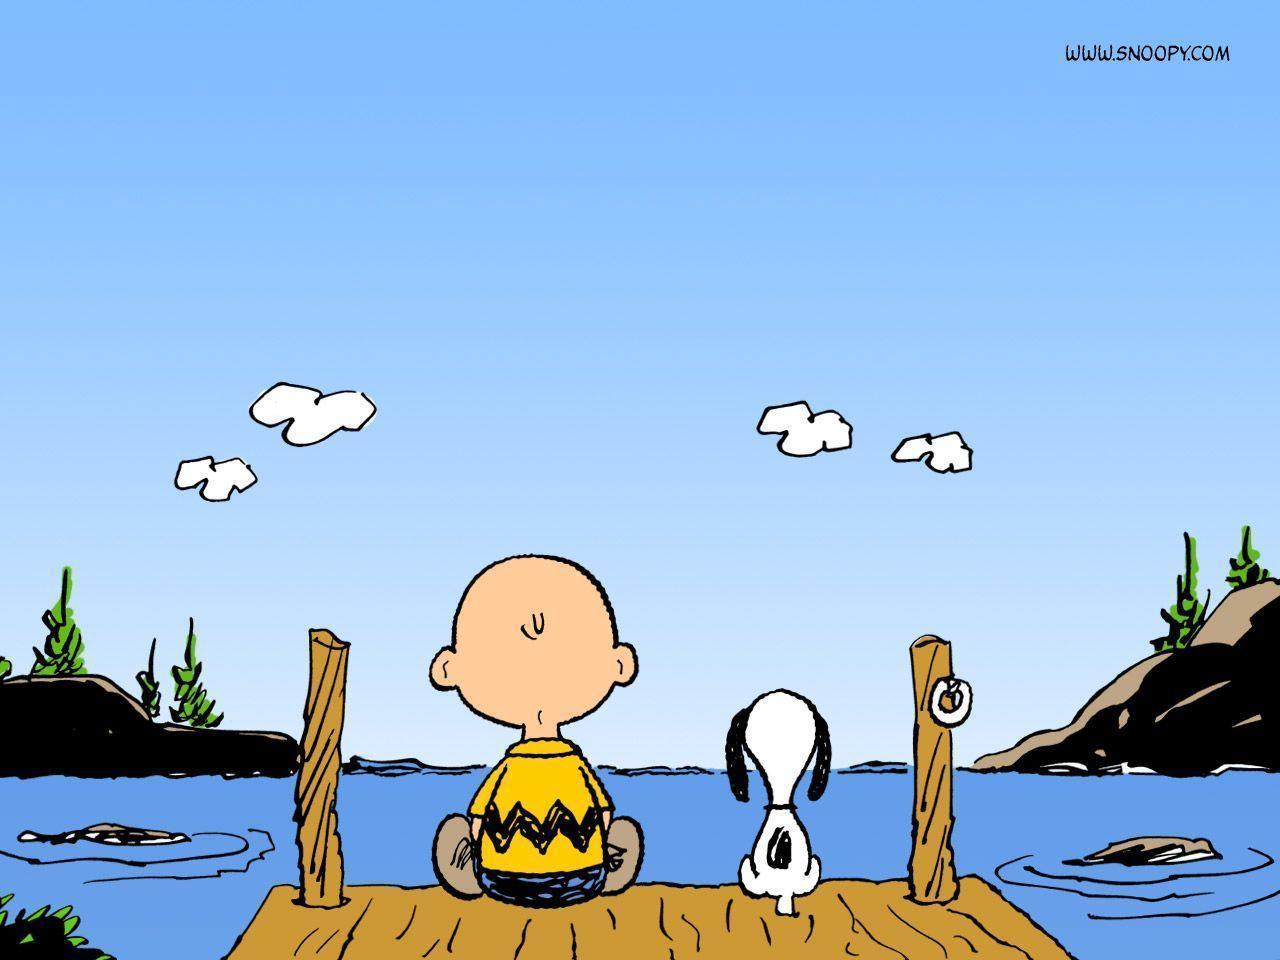 Snoopy Cartoon Wallpaper For Phone